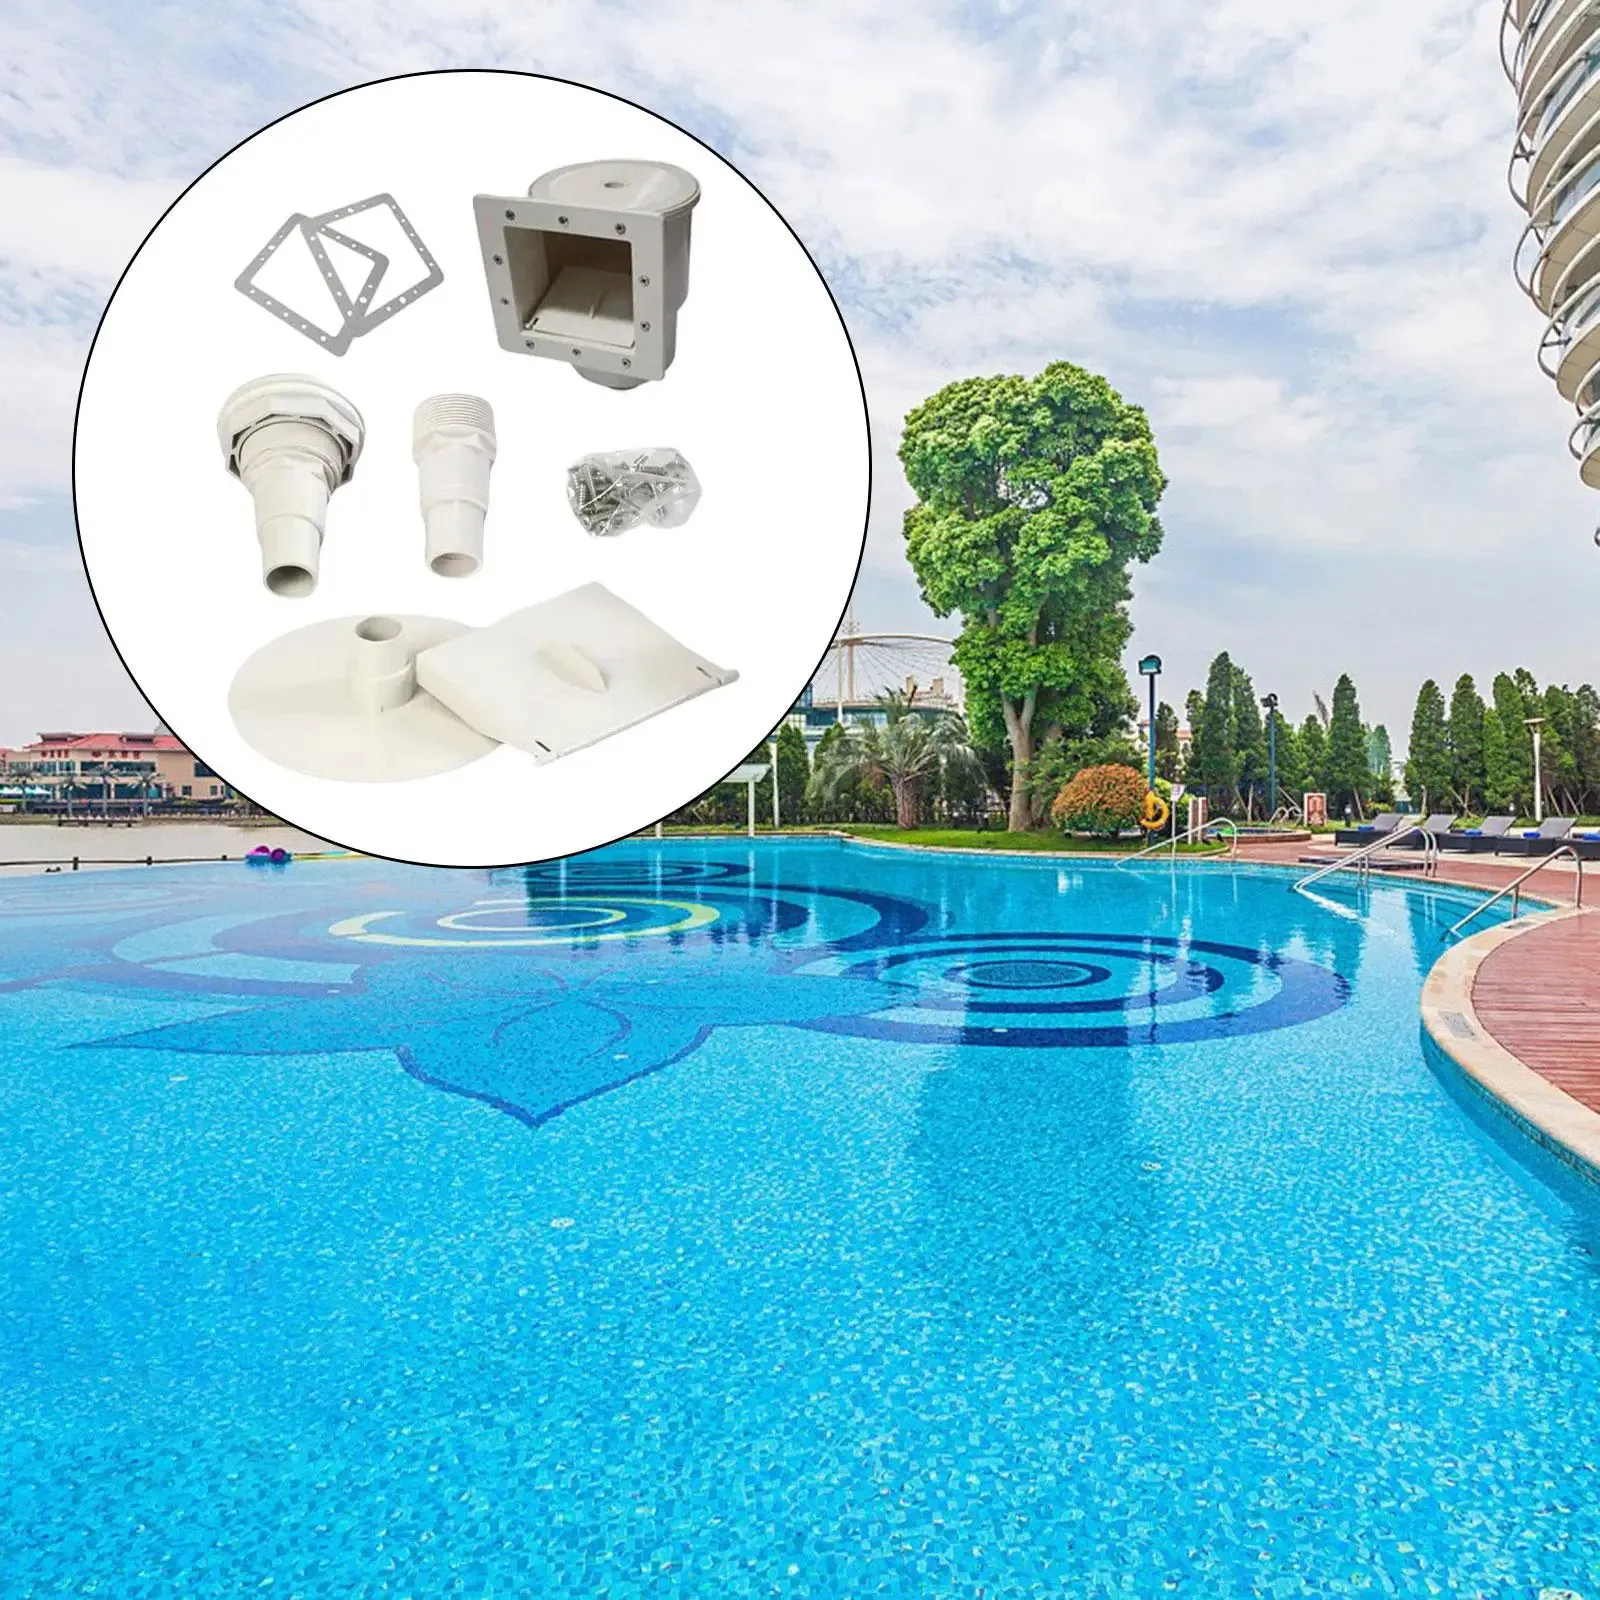 Pool Skimmer Set Fittings Cleaning Accessories Vacuum Hose Adapter Thru-wall Skimmer Durable Pool Supply Complete Accessory Set